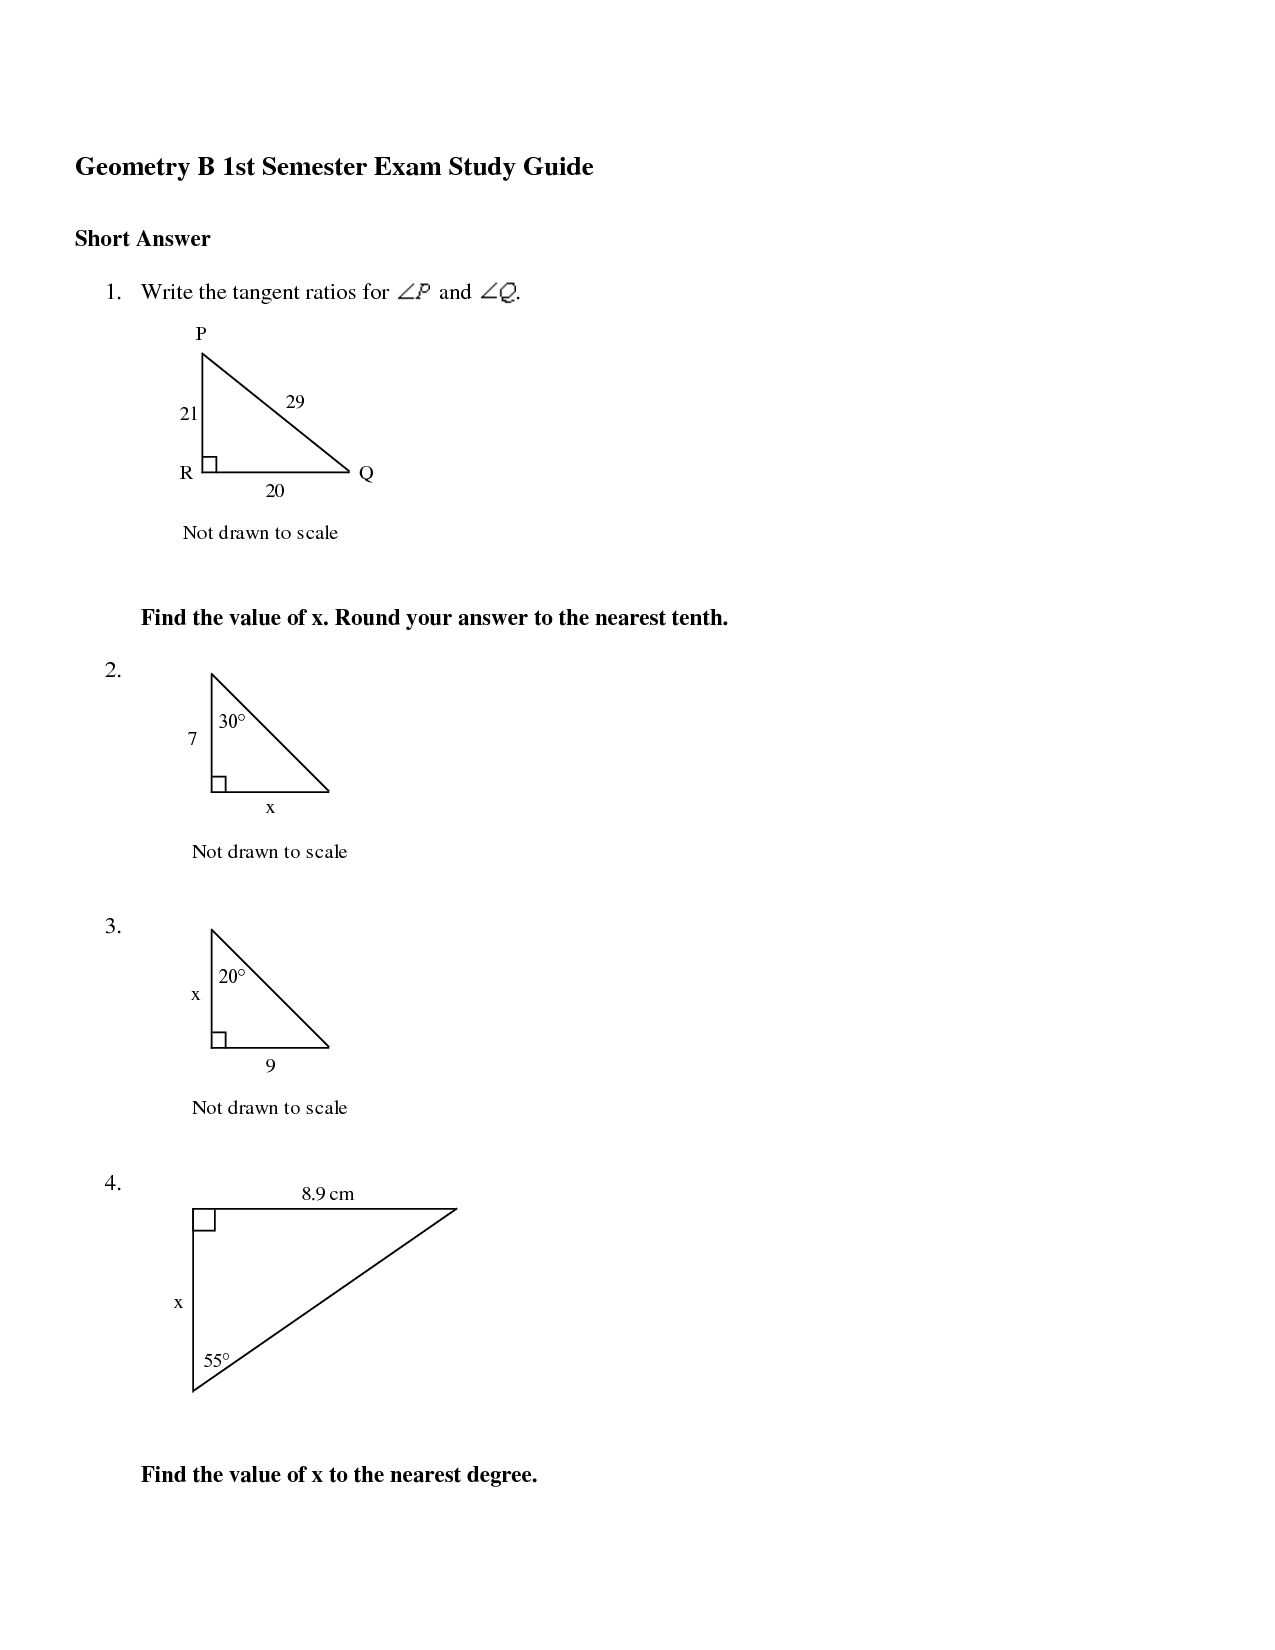 13-best-images-of-10th-grade-math-worksheets-10th-grade-math-practice-worksheets-10th-grade